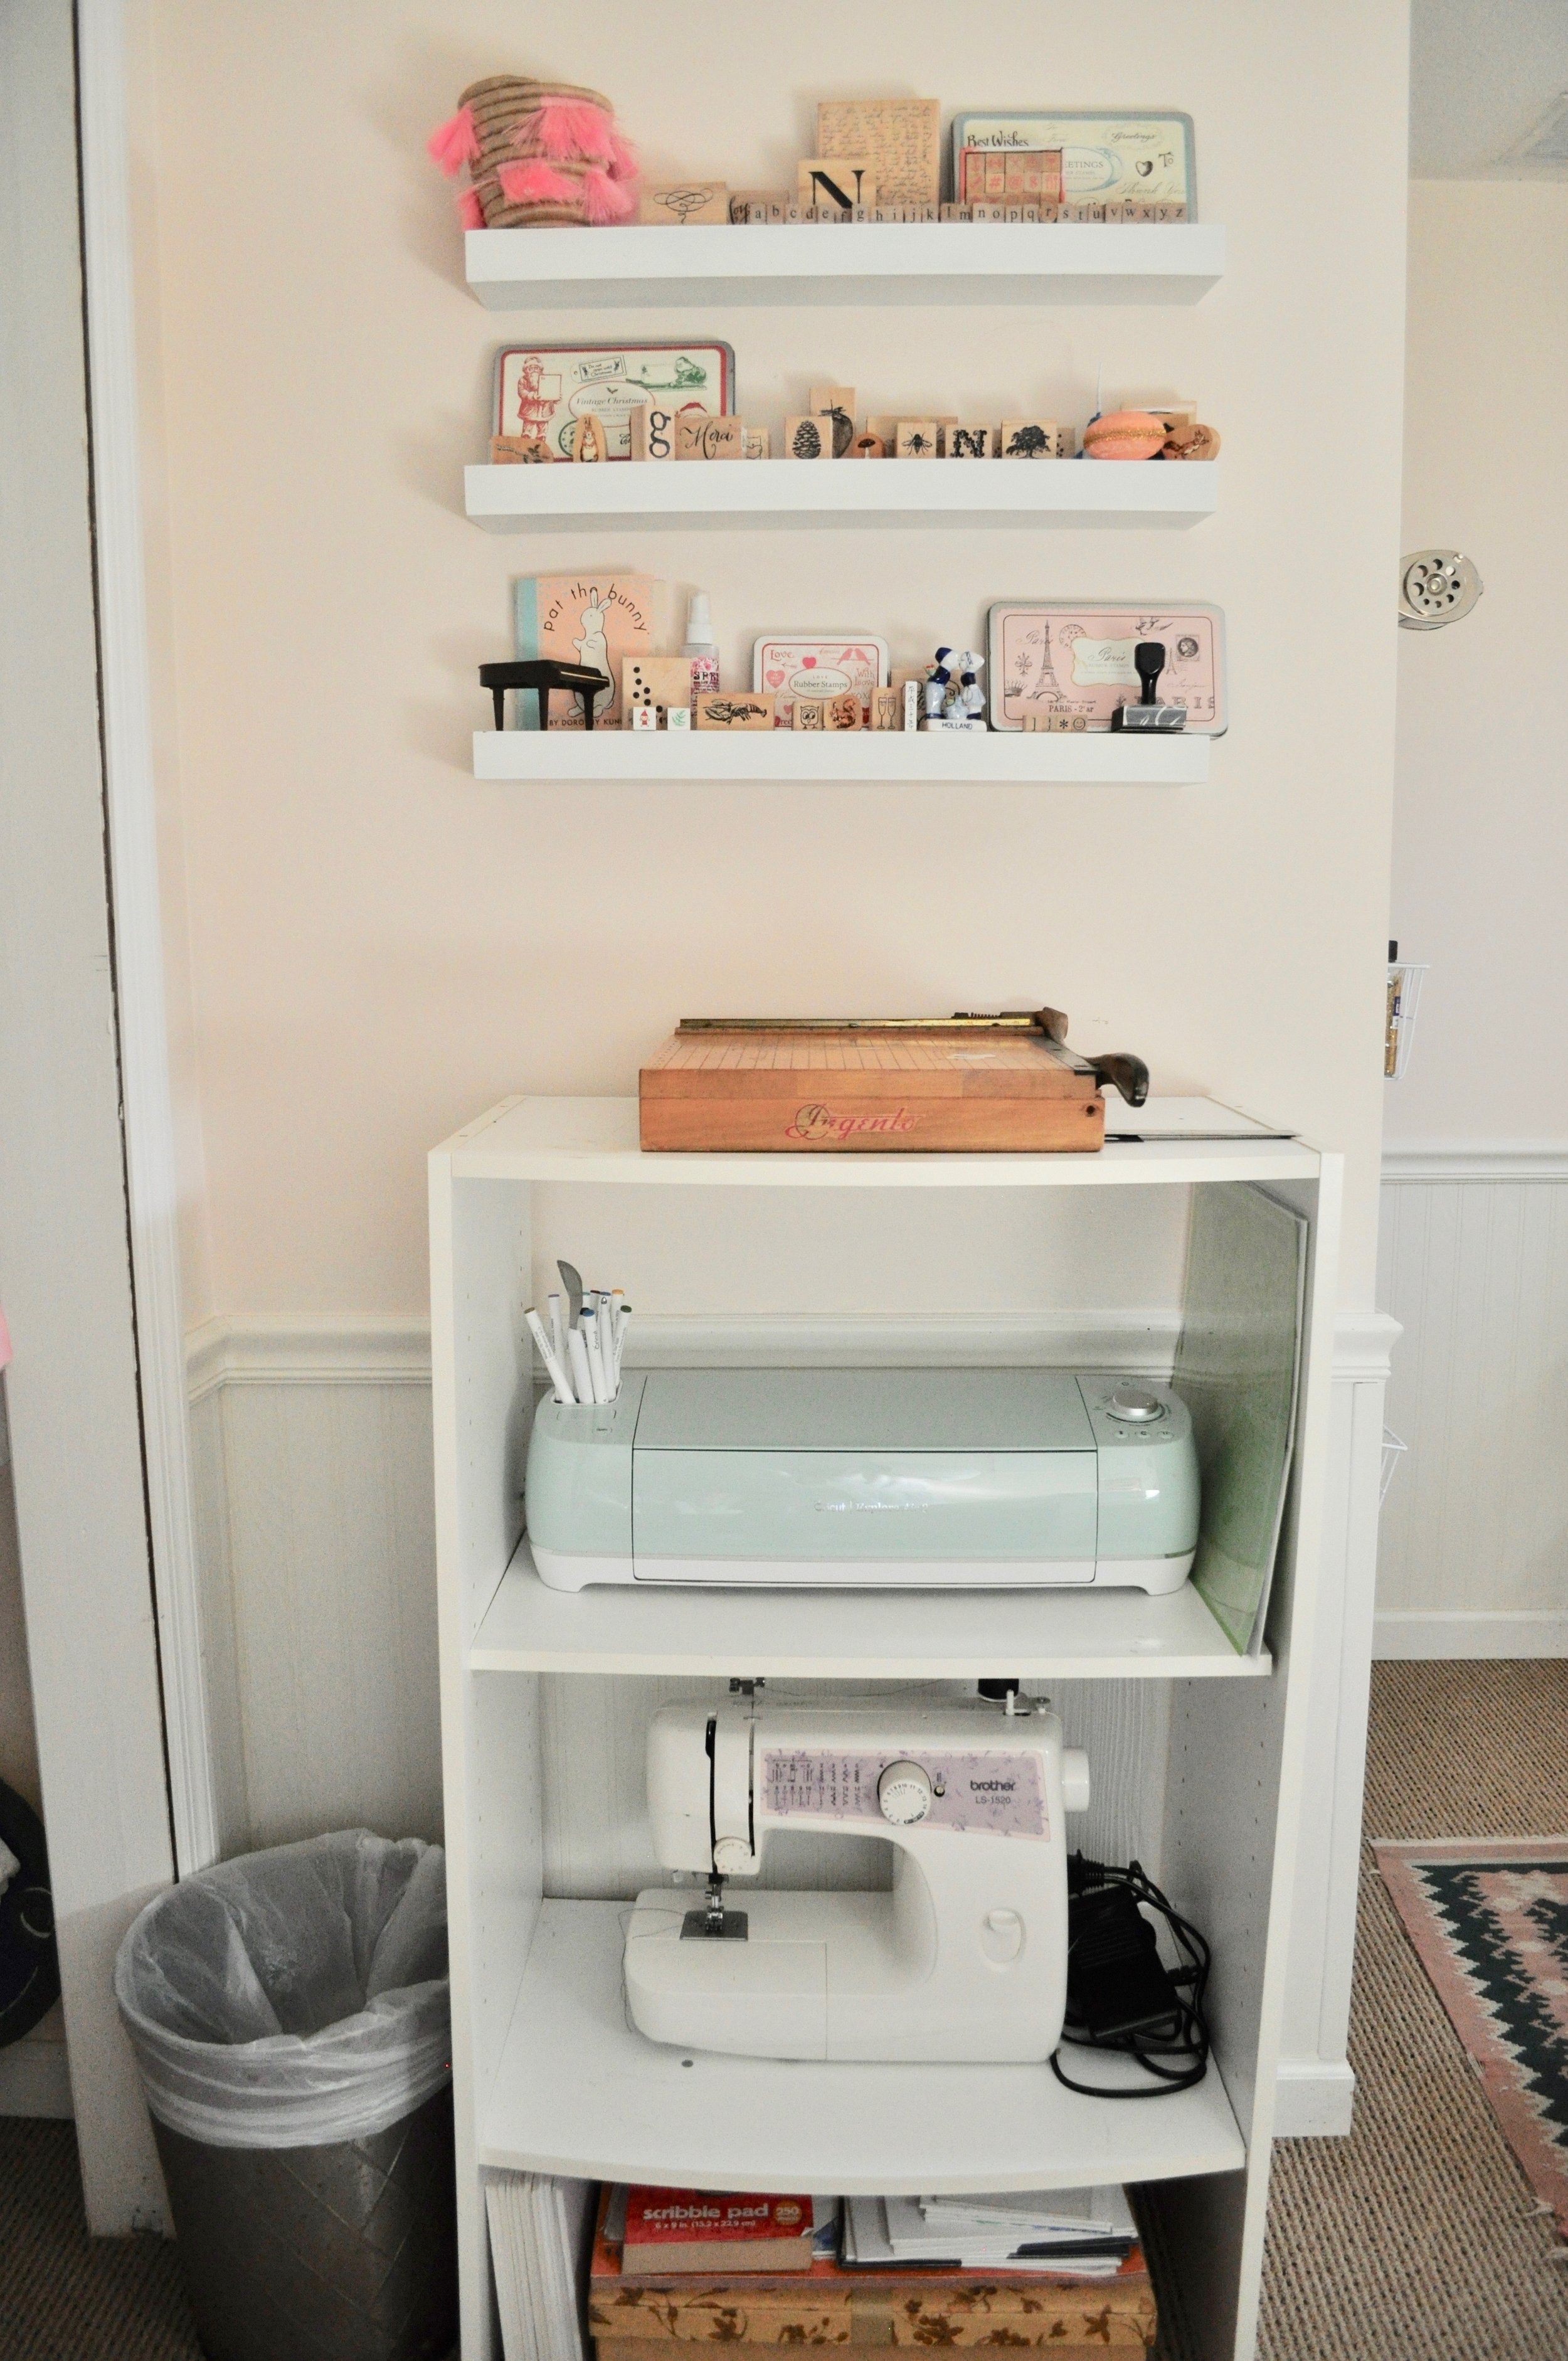 I can see all of my stamps displayed on floating shelves, and use this chopping block paper cutter at least once a week; shelves below house my Cricut and sewing machine